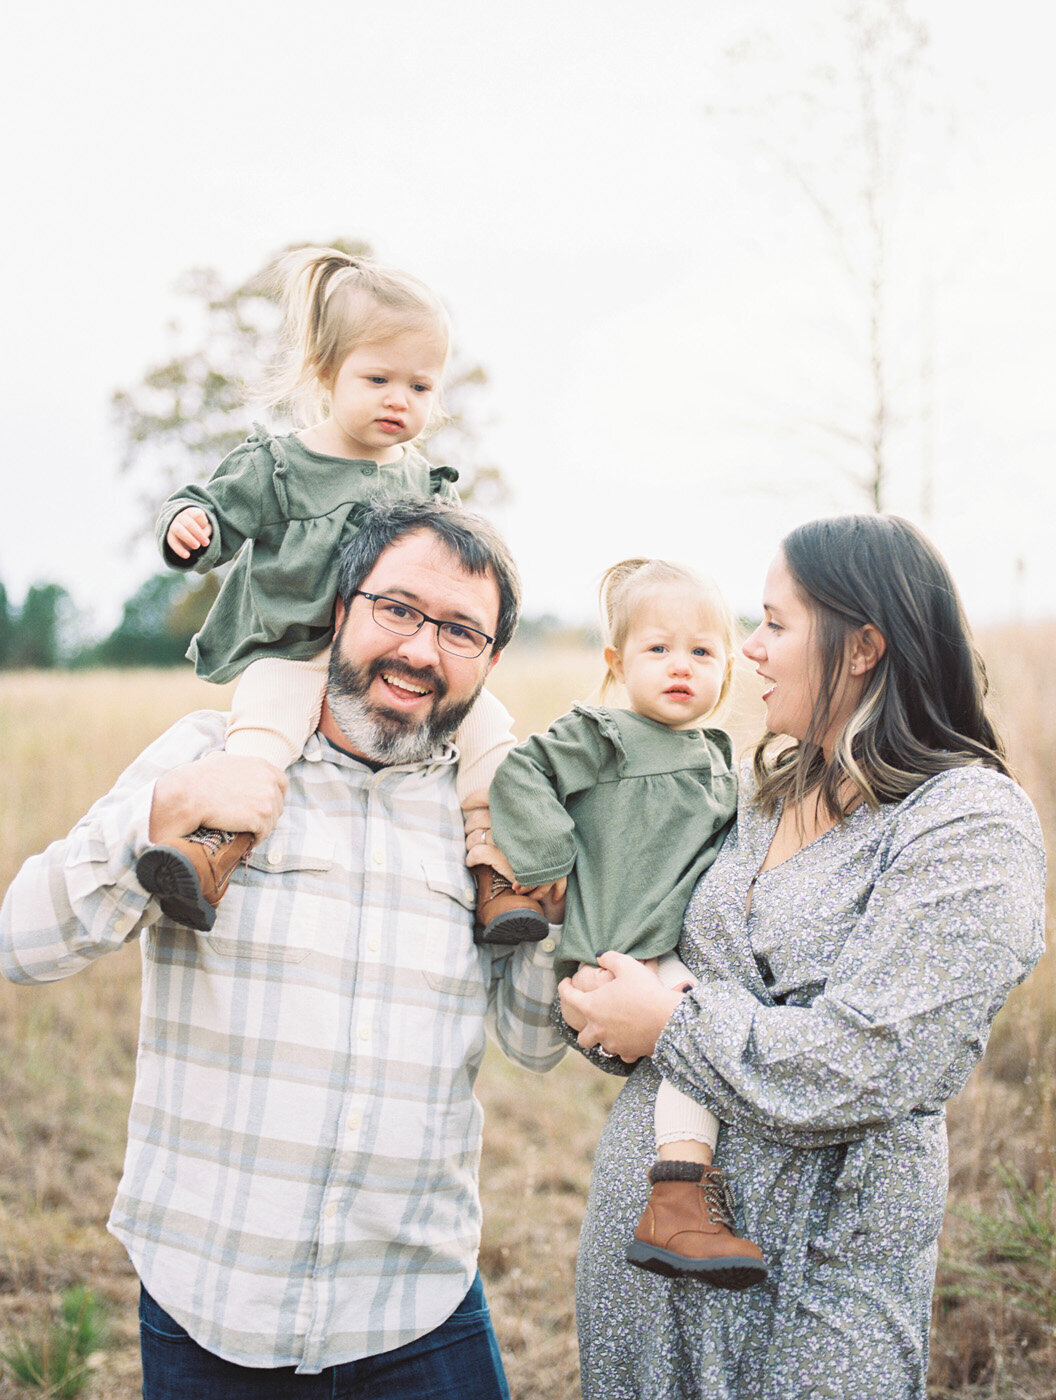 Raleigh Family Photographer | Jessica Agee Photography - 035